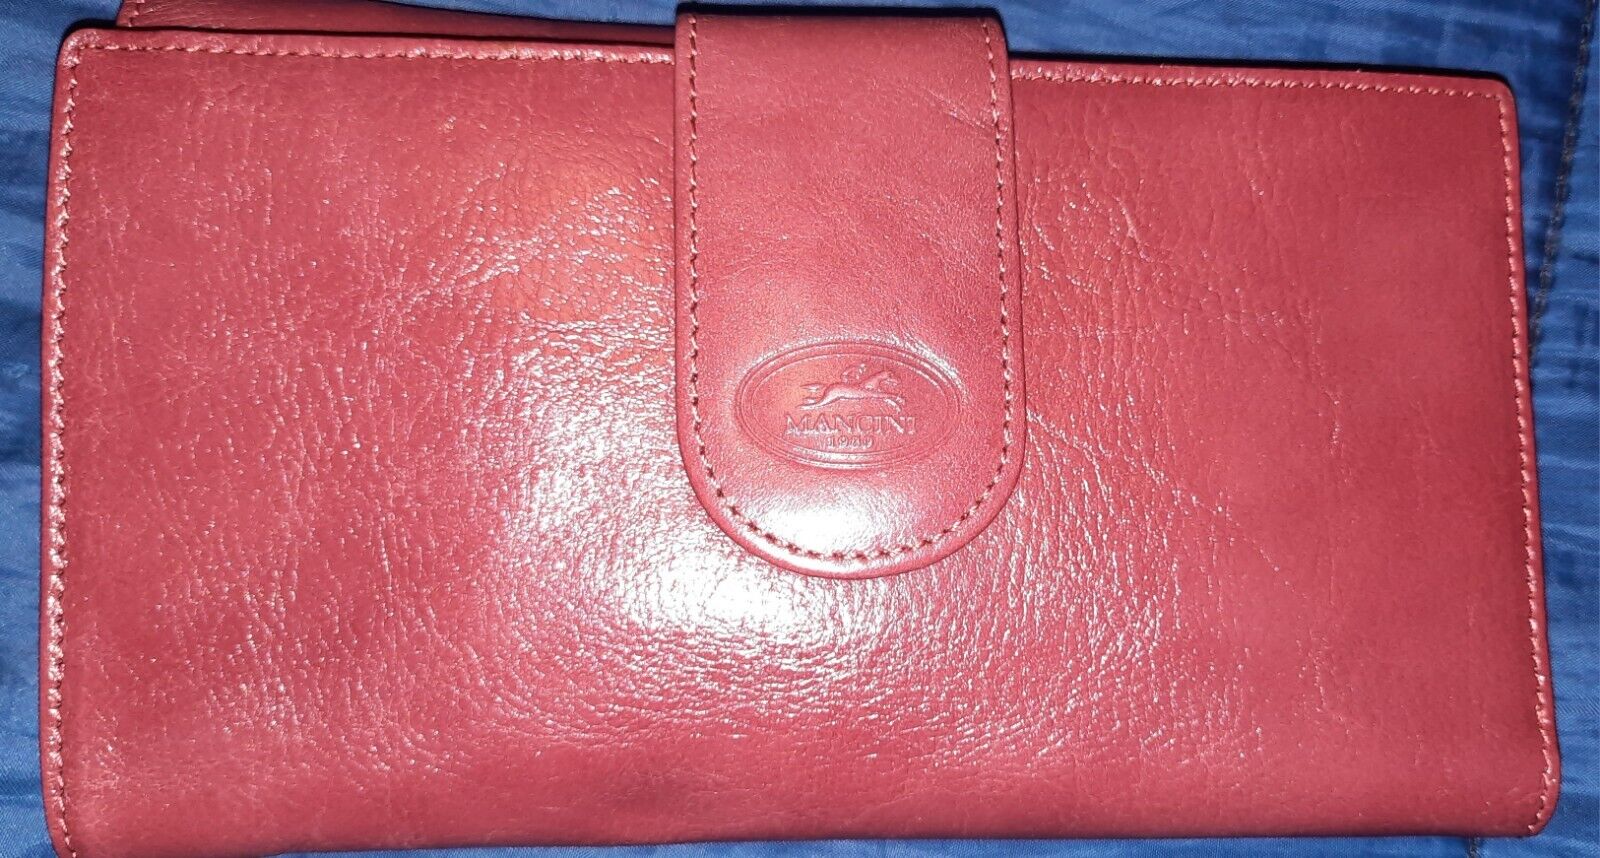 MANCINI Women's Red Leather Wallet - Pockets for Everything